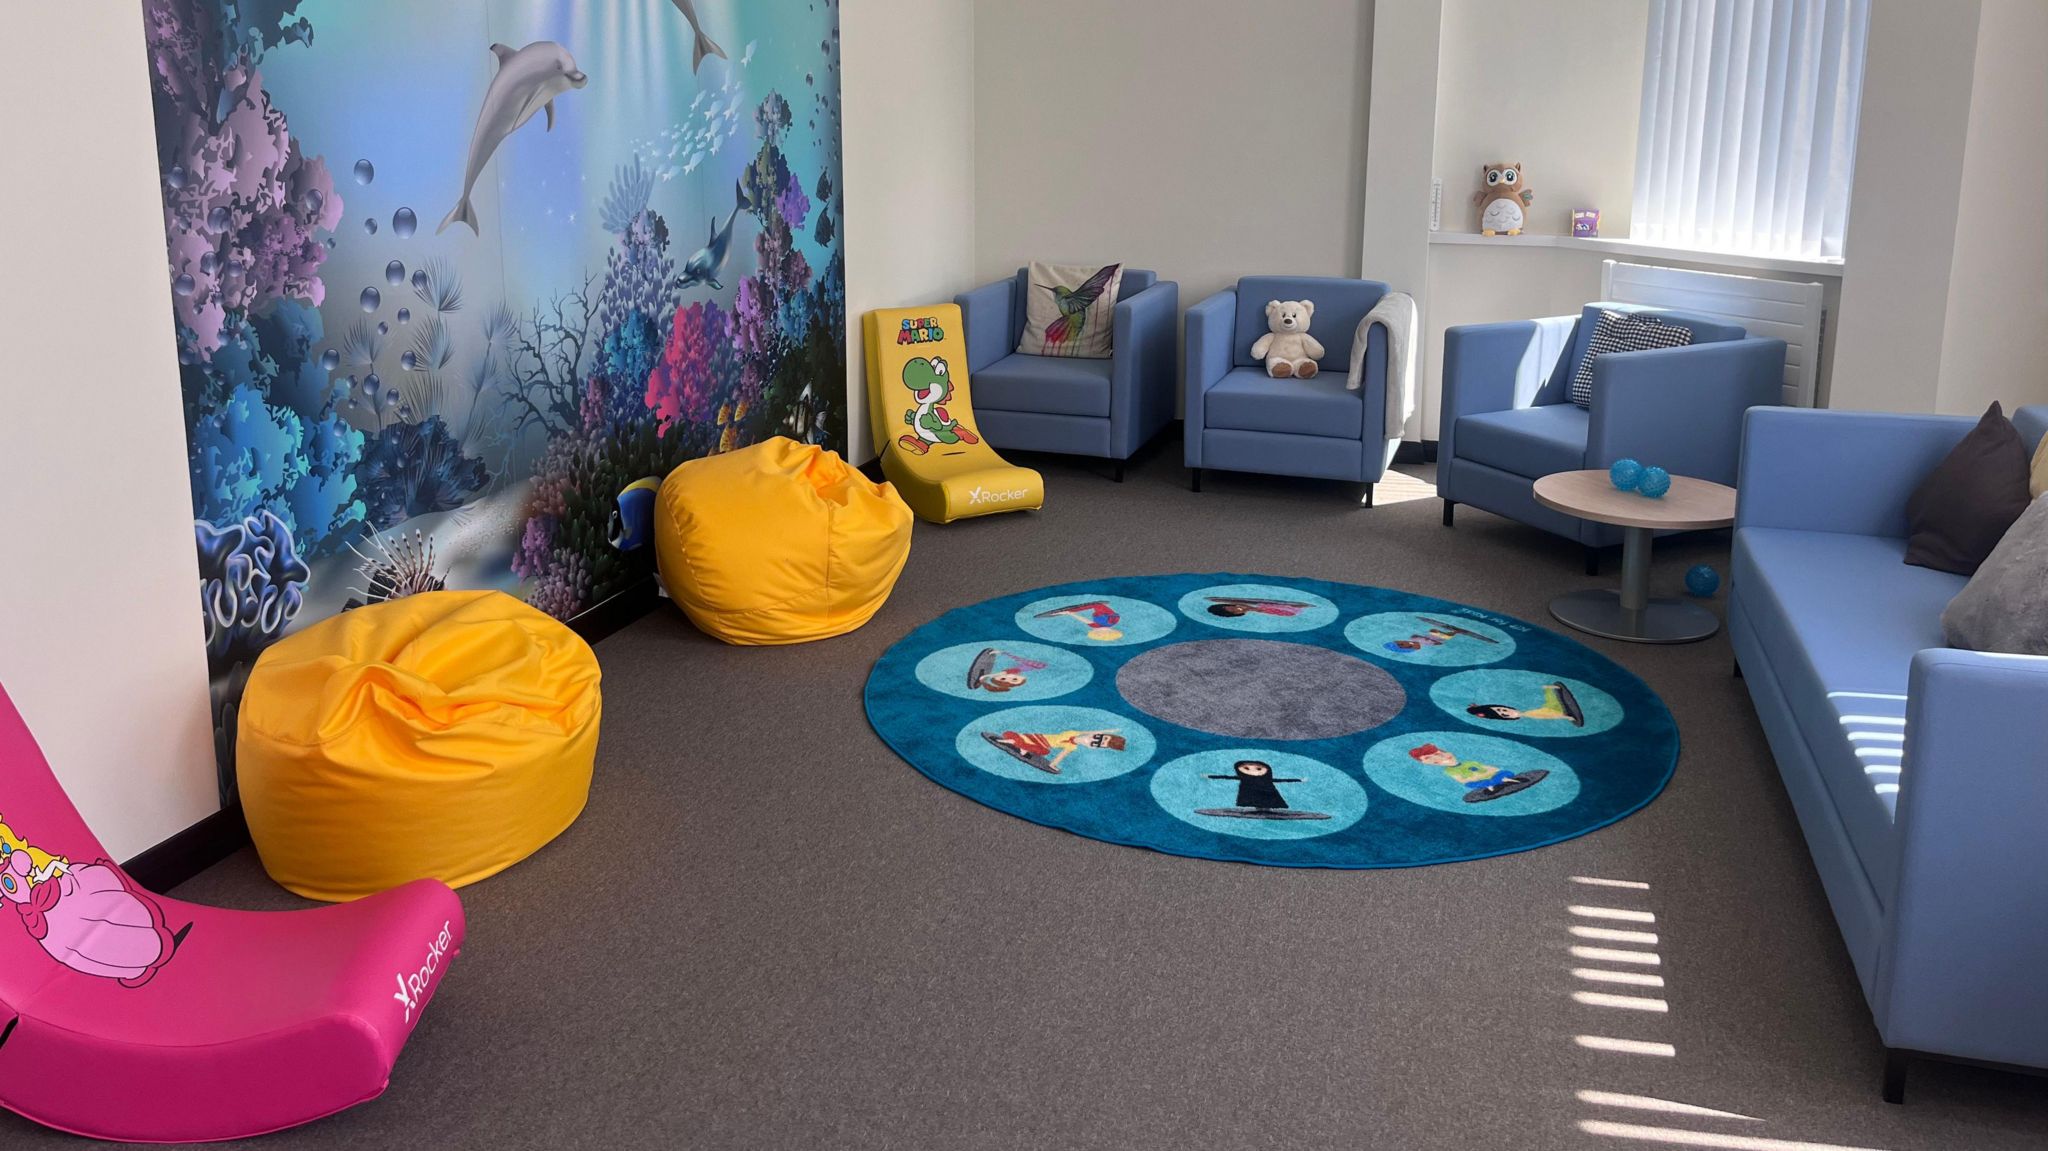 The children's room at the facility - there's a sealife picture on the wall, bright yellow bean bags and pink and yellow rocker chairs. There's also a rug and a teddy bear on one of the blue chairs